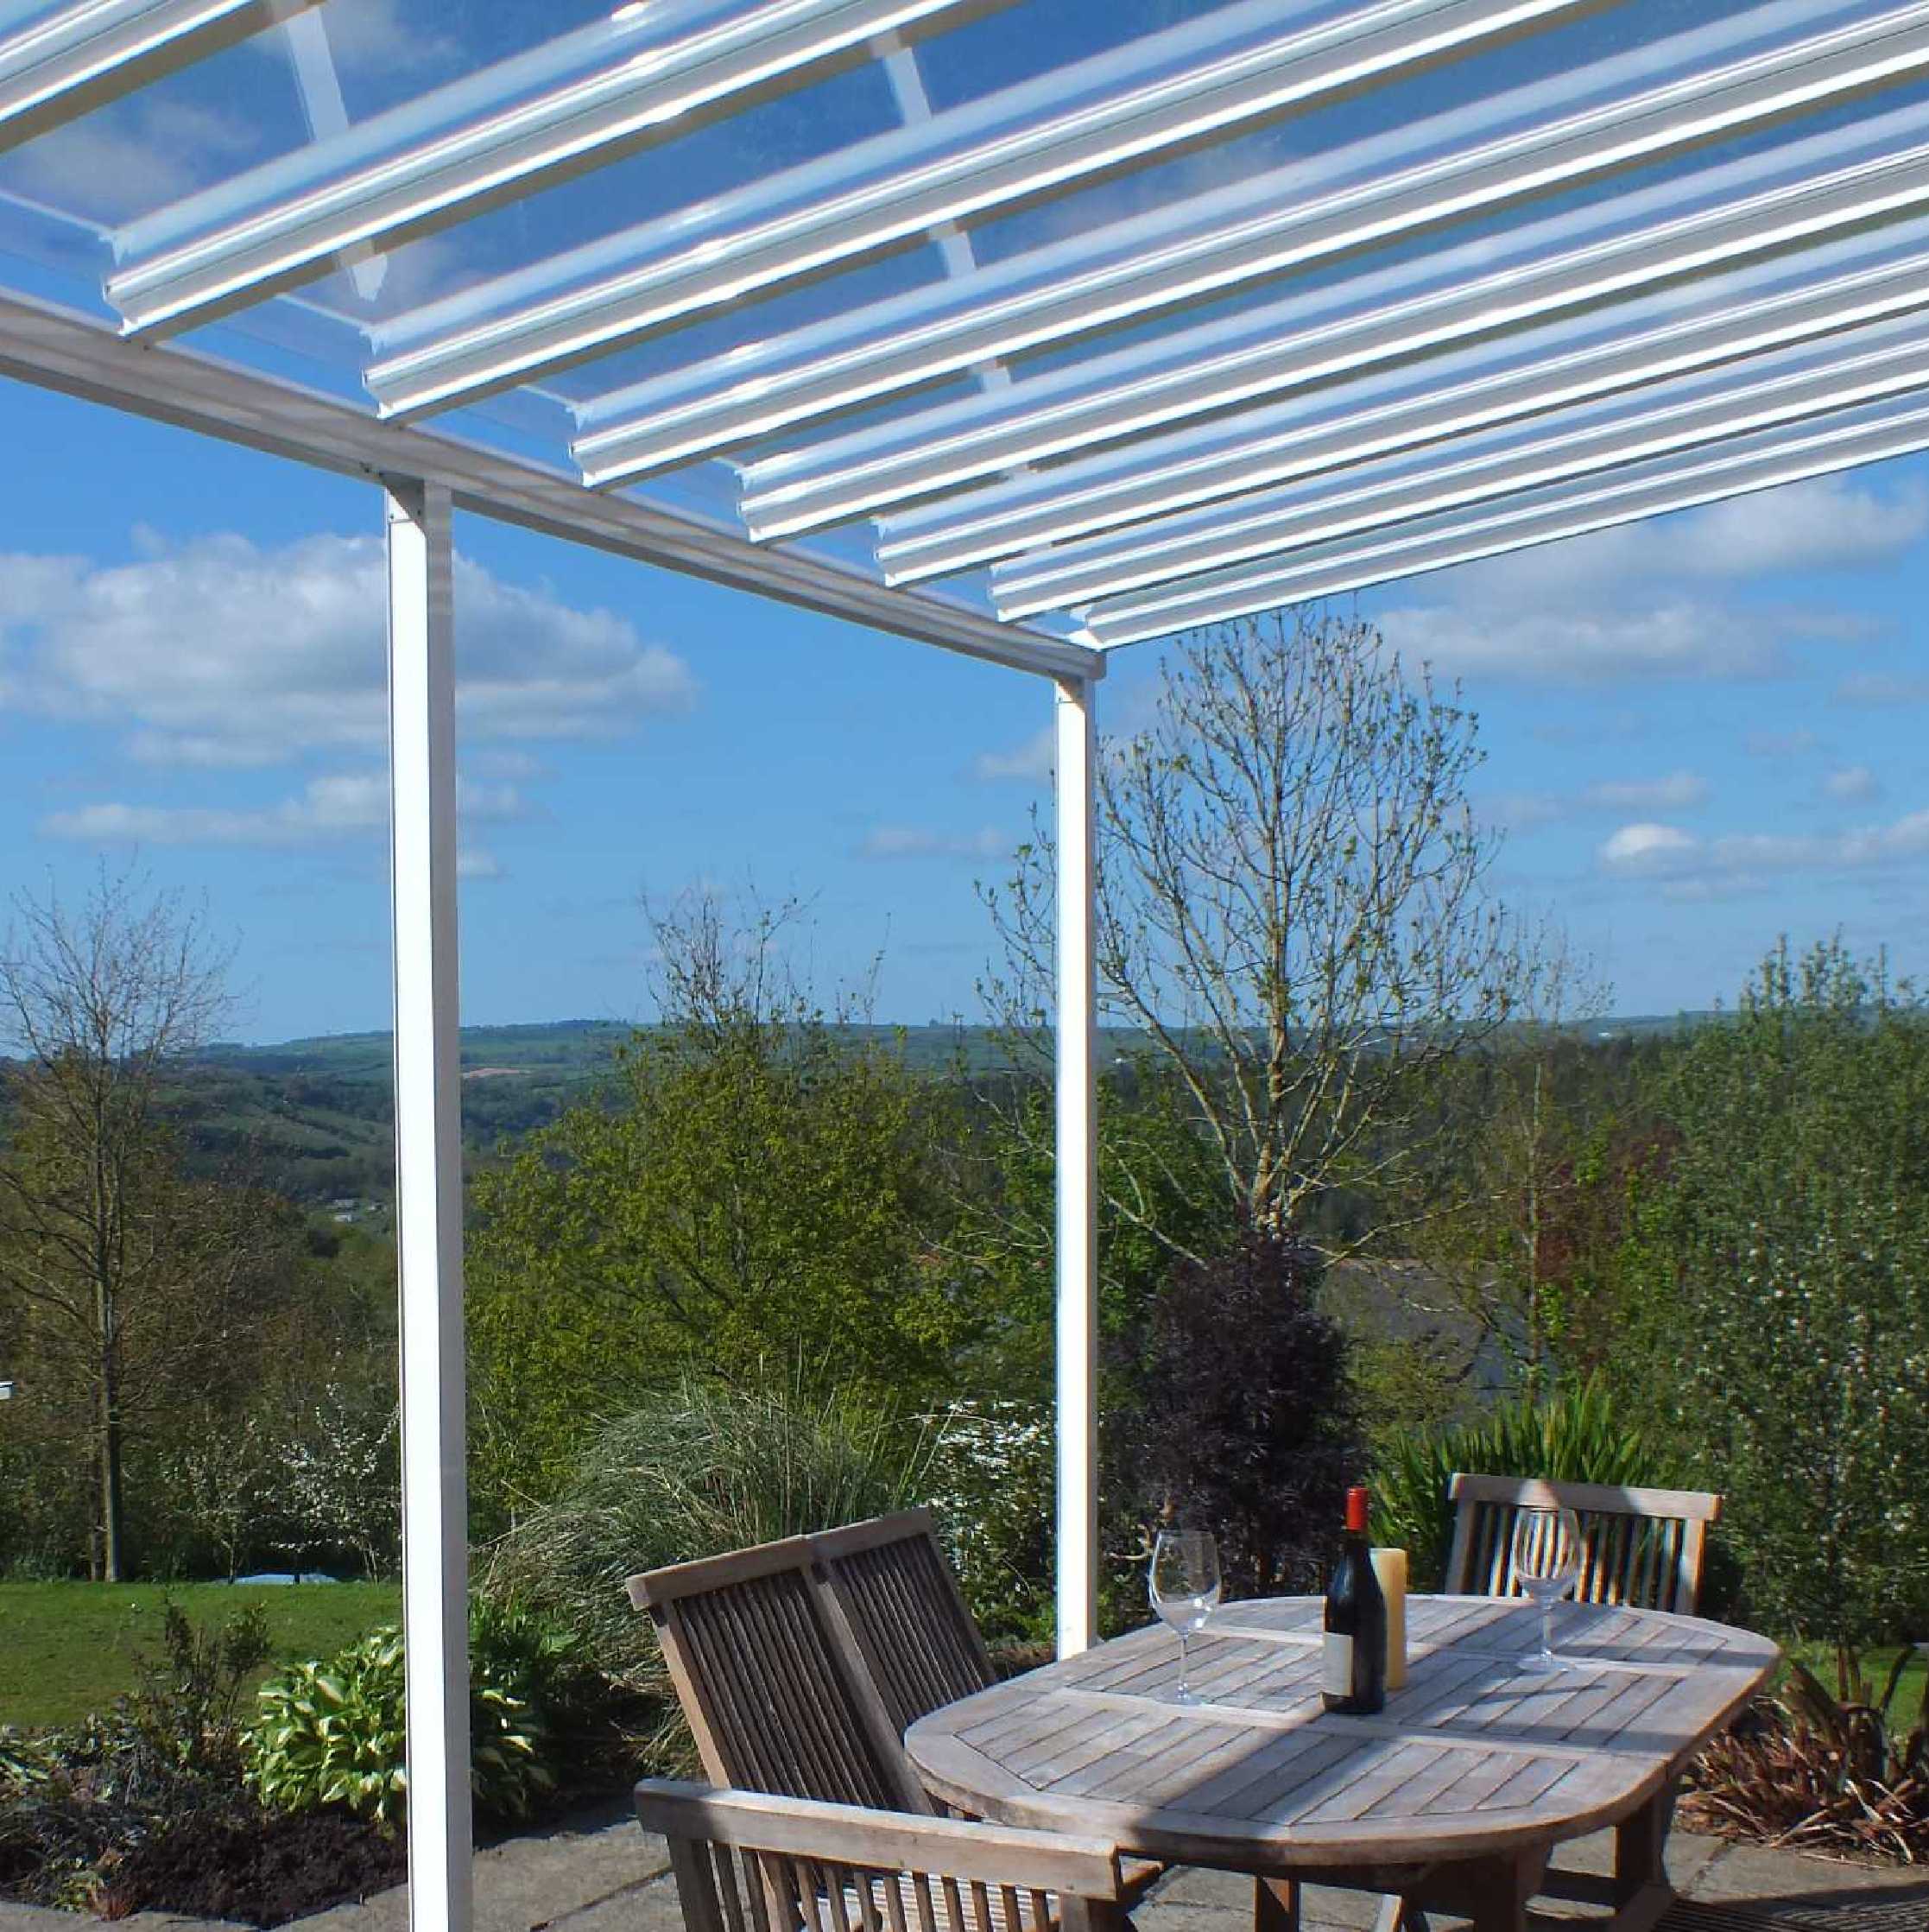 Buy Omega Smart Lean-To Canopy, White with 6mm Glass Clear Plate Polycarbonate Glazing - 10.5m (W) x 3.5m (P), (5) Supporting Posts online today